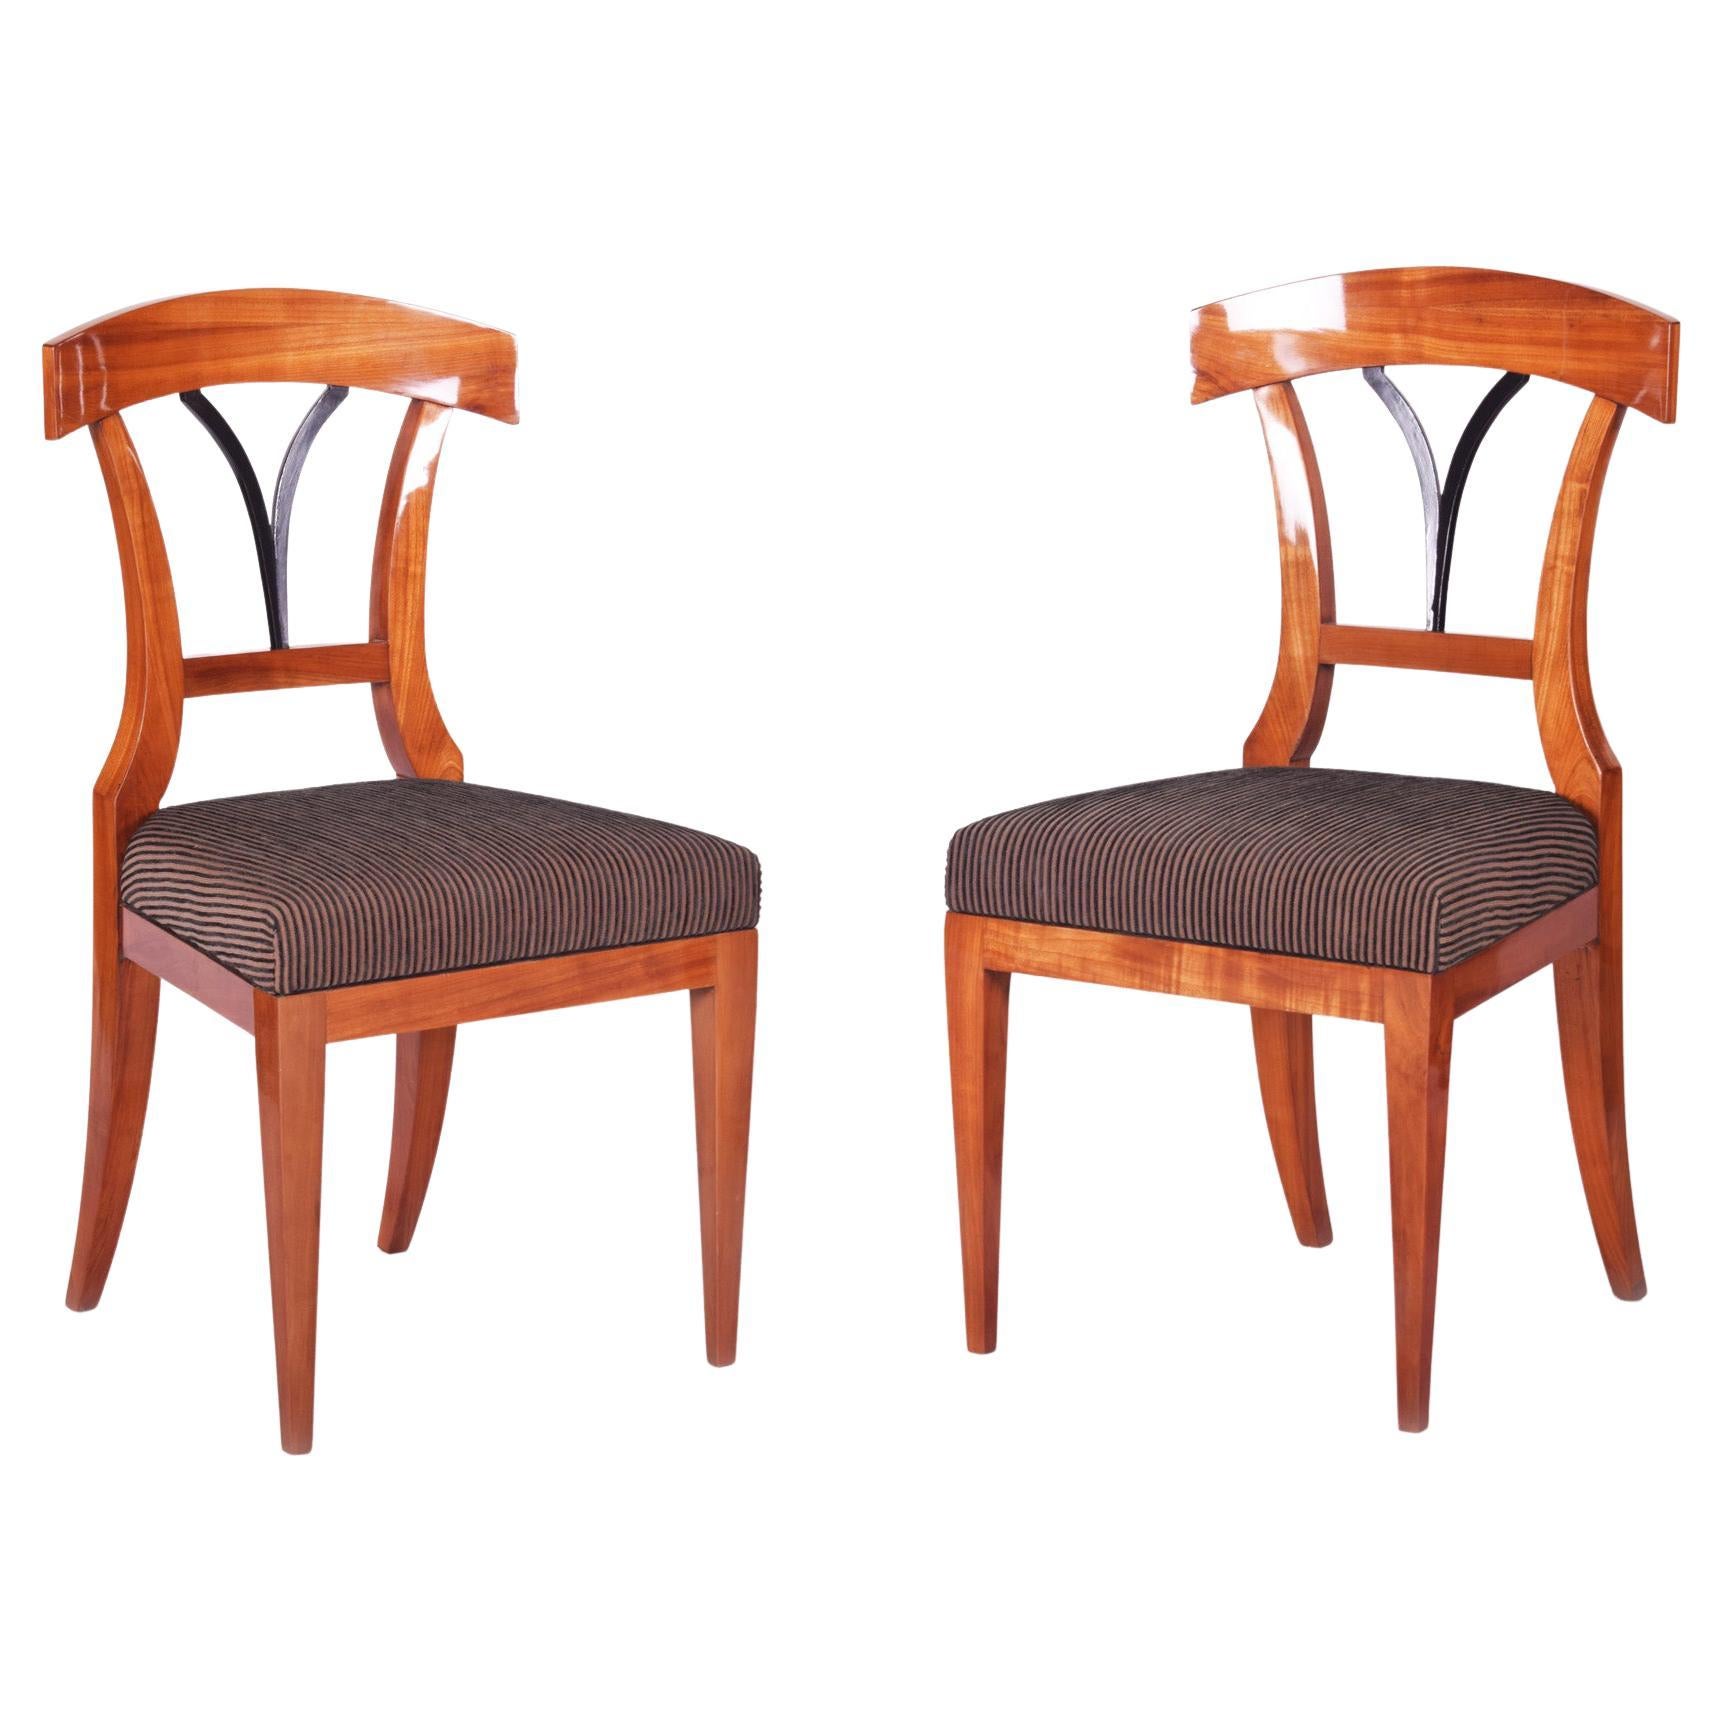 Pair of 19th Century Biedermeier Dining Chairs Made in 1930s Czechia